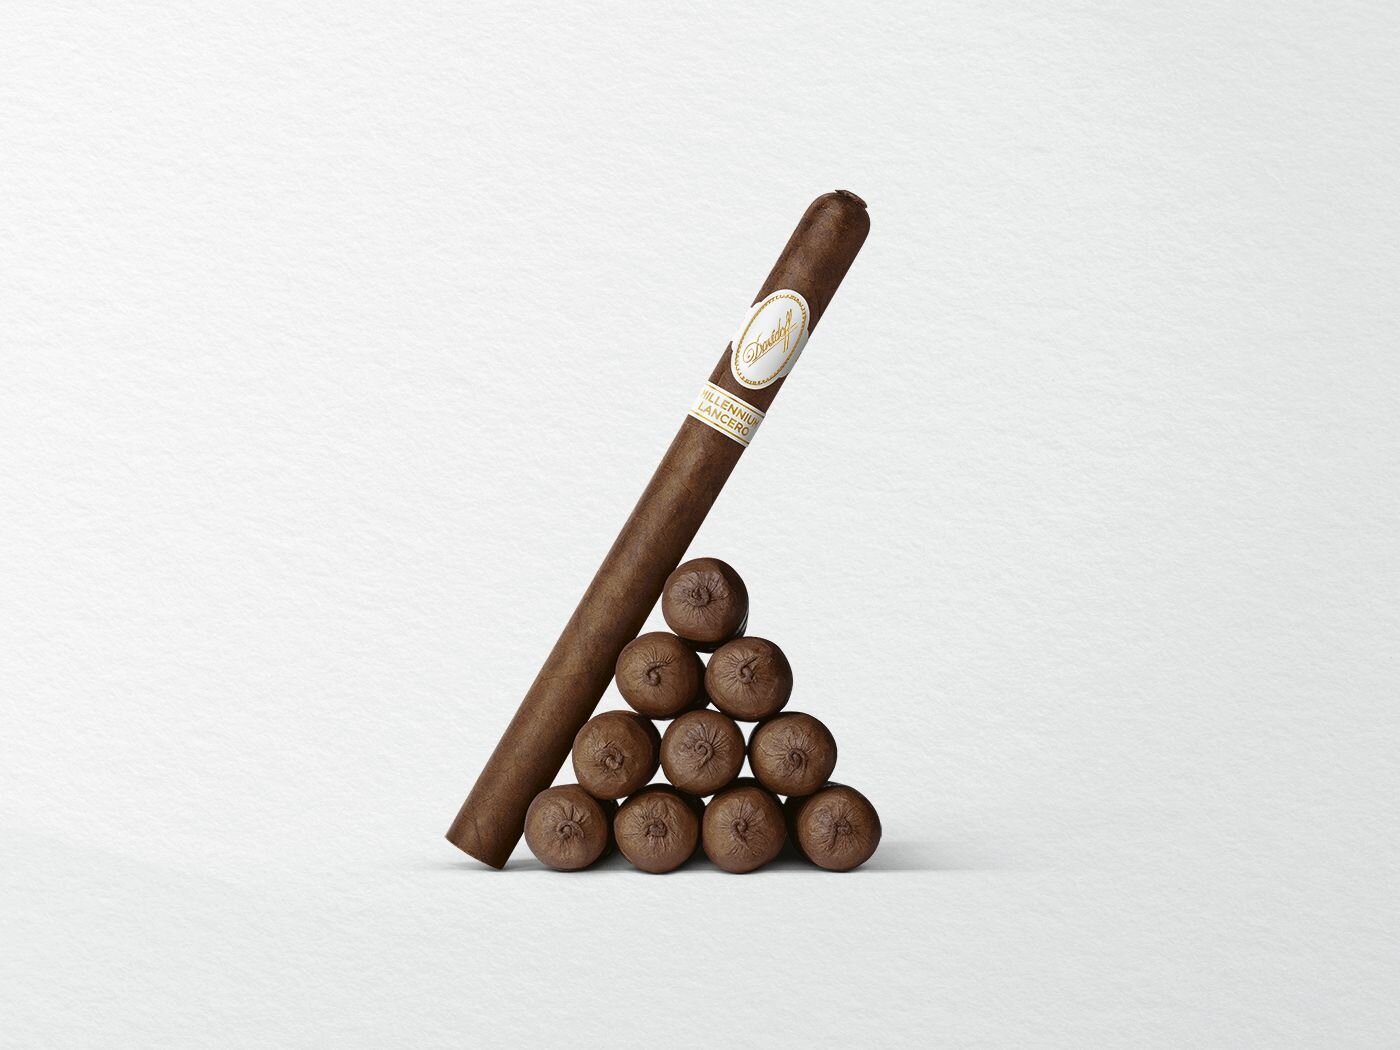 10 cigars of the Davidoff Millennium Lancero Limited Edition piled up in a triangular shape, with one cigar leaning against them.